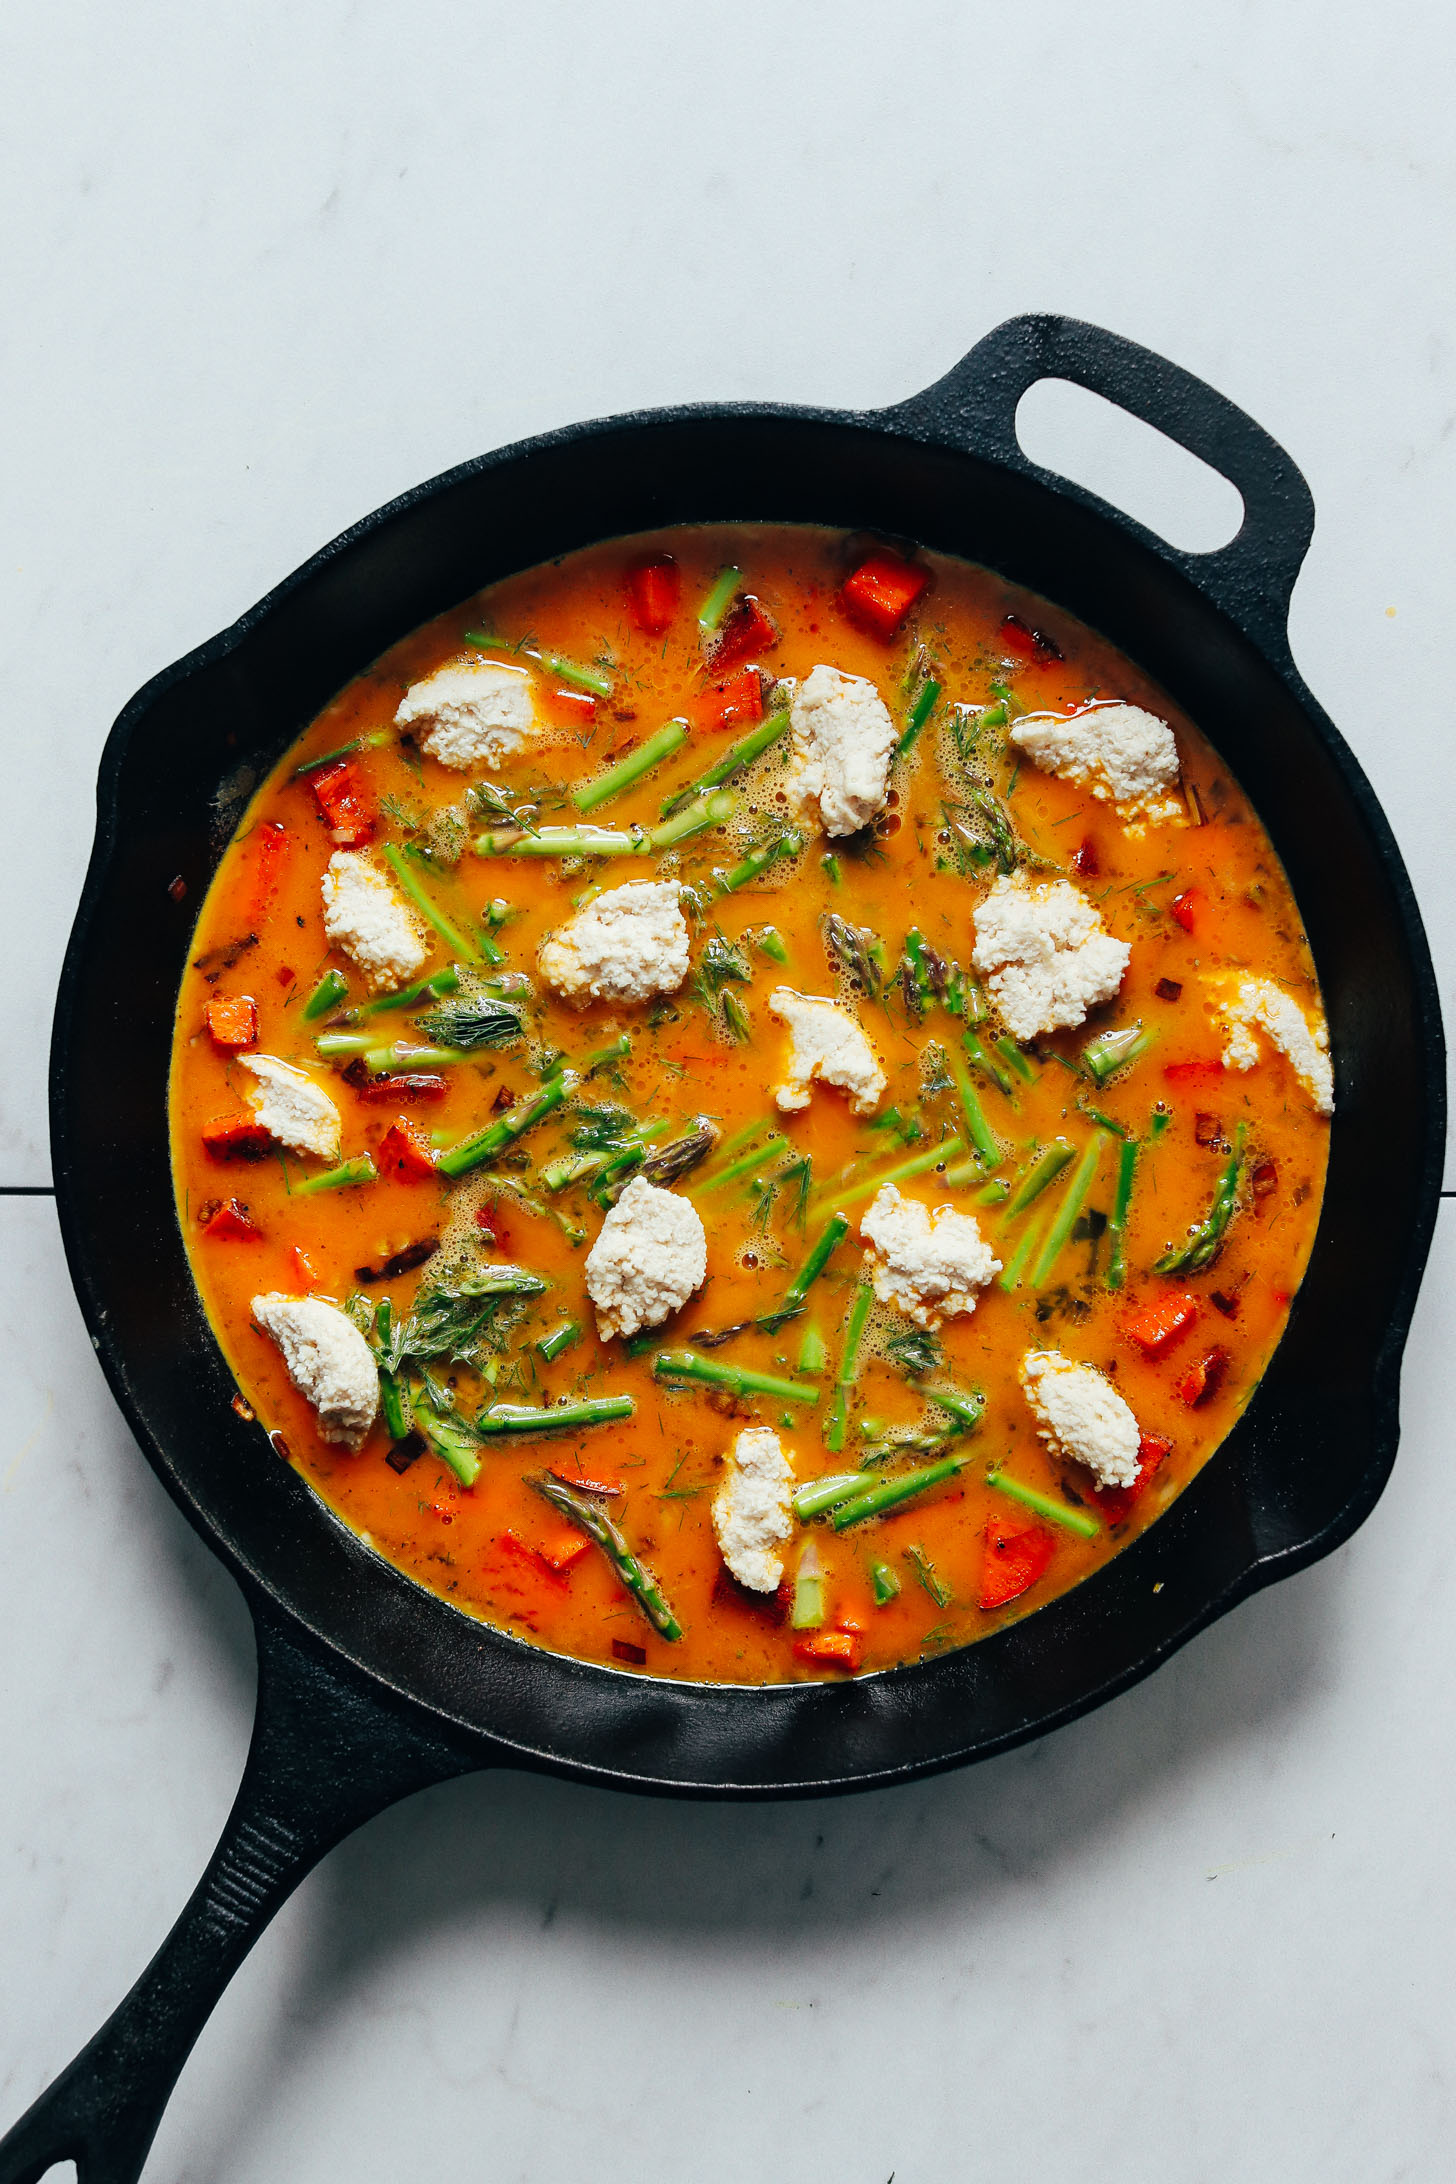 Skillet of uncooked Frittata with asparagus, nut cheese, and dill